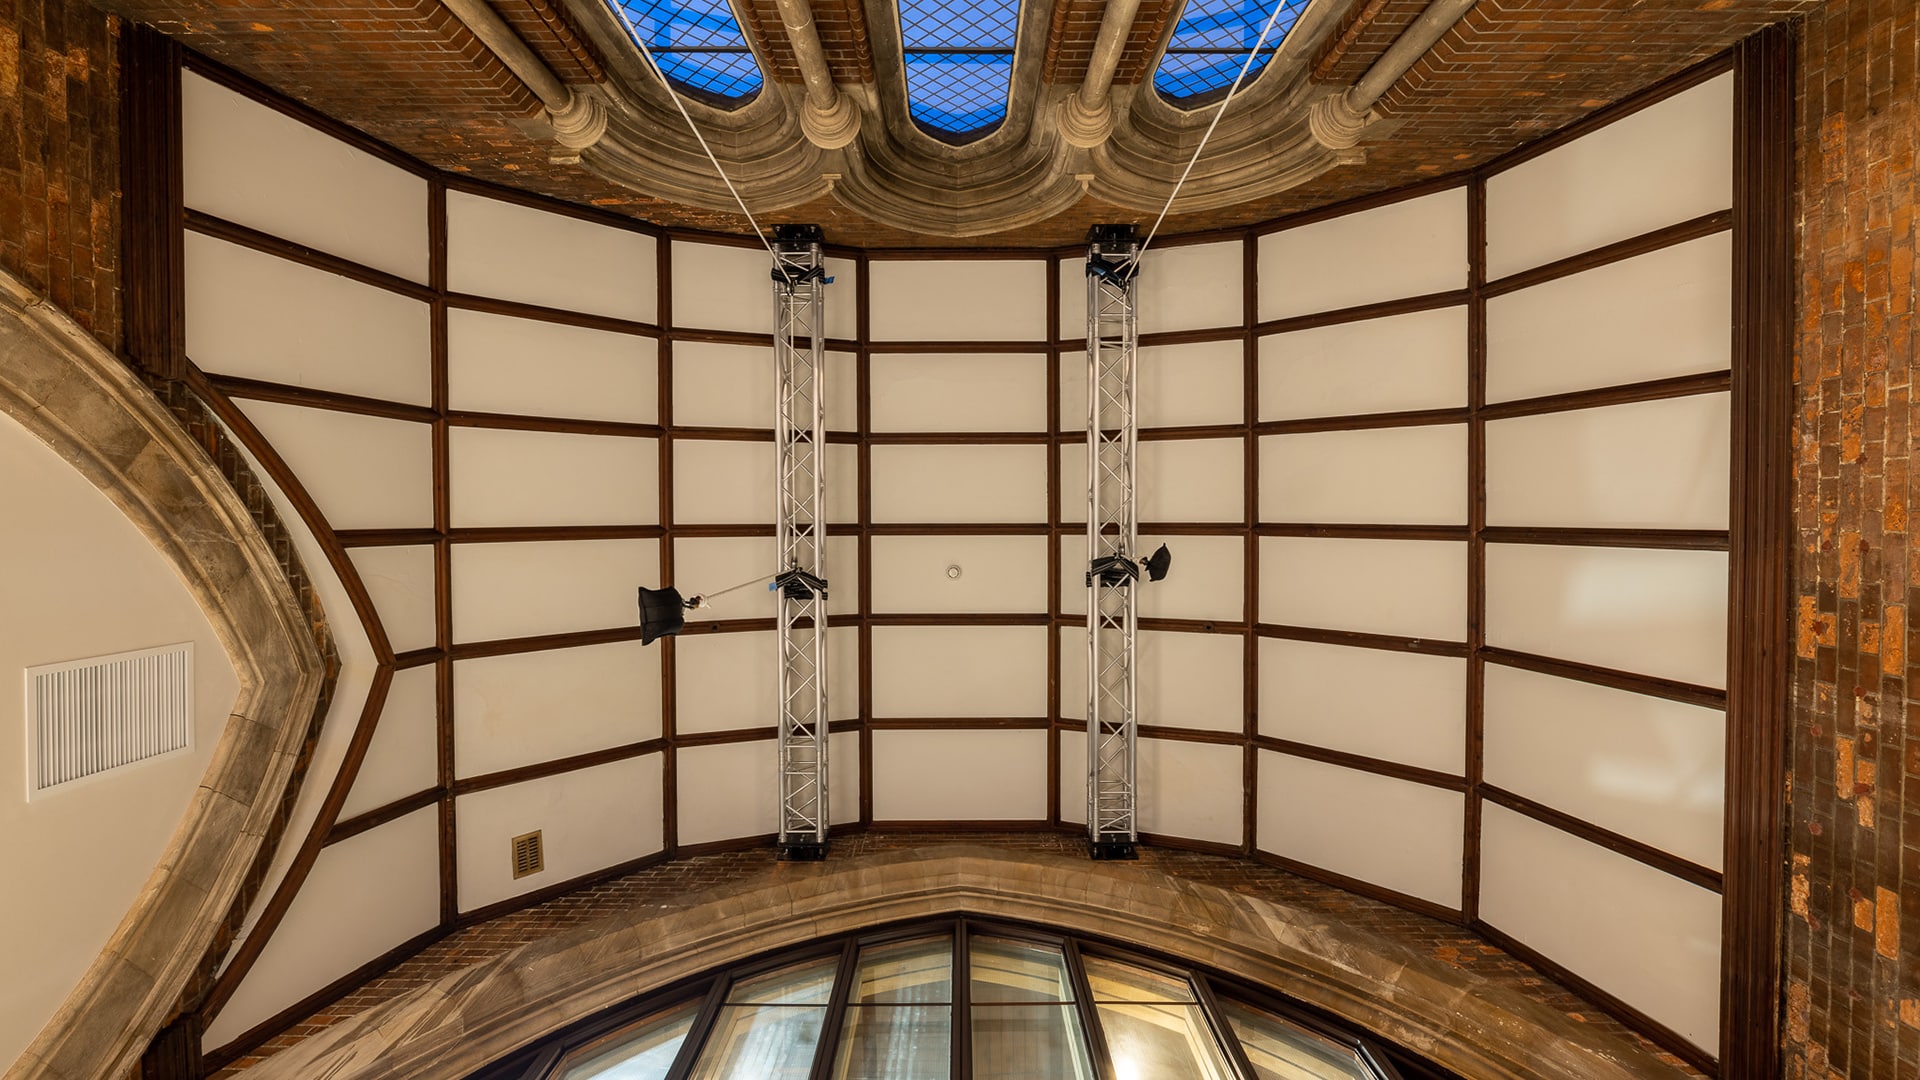 Photo of the high ceiling of studio 4, with rigging for aerial work